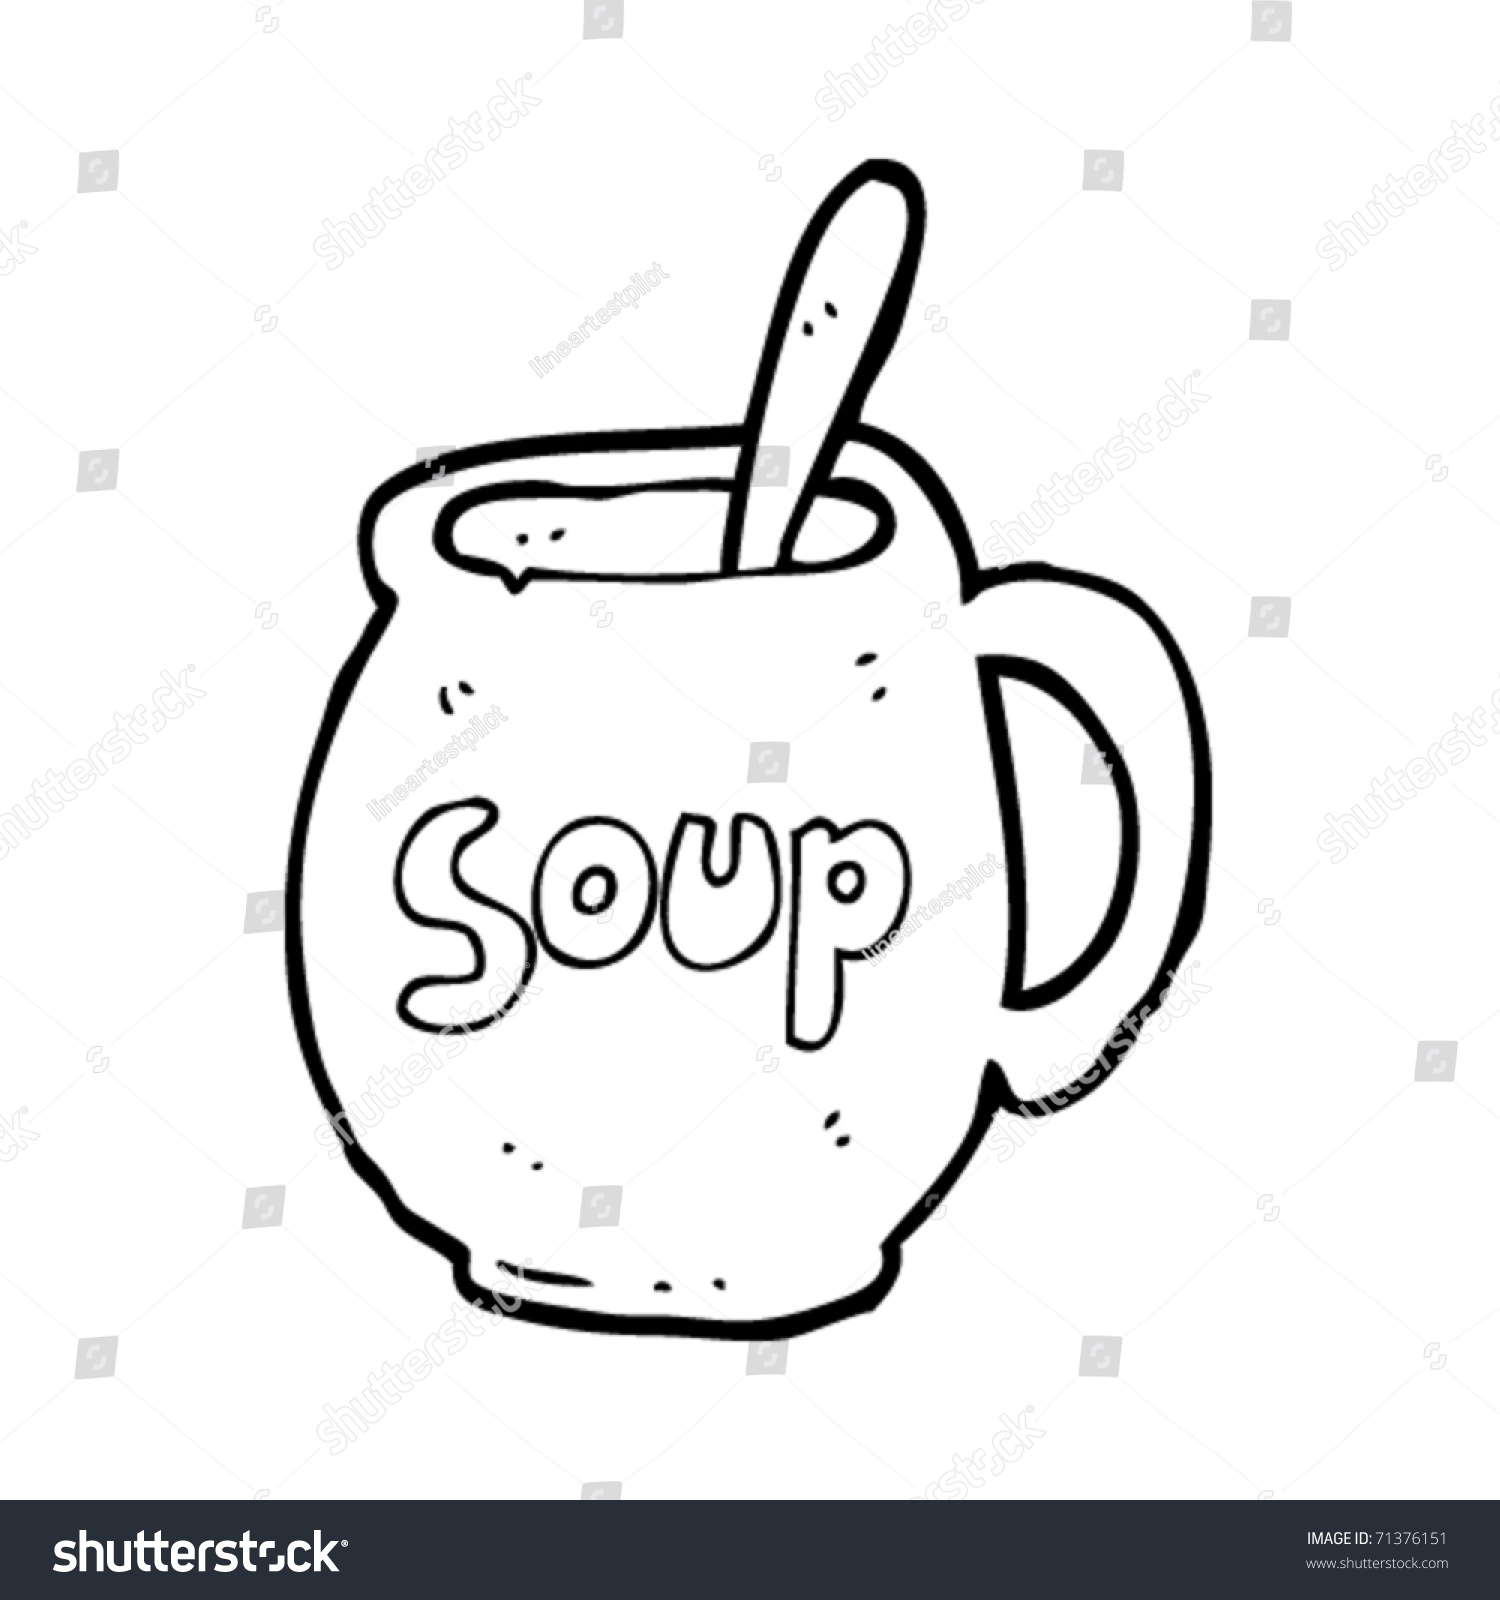 clipart cup of soup - photo #6